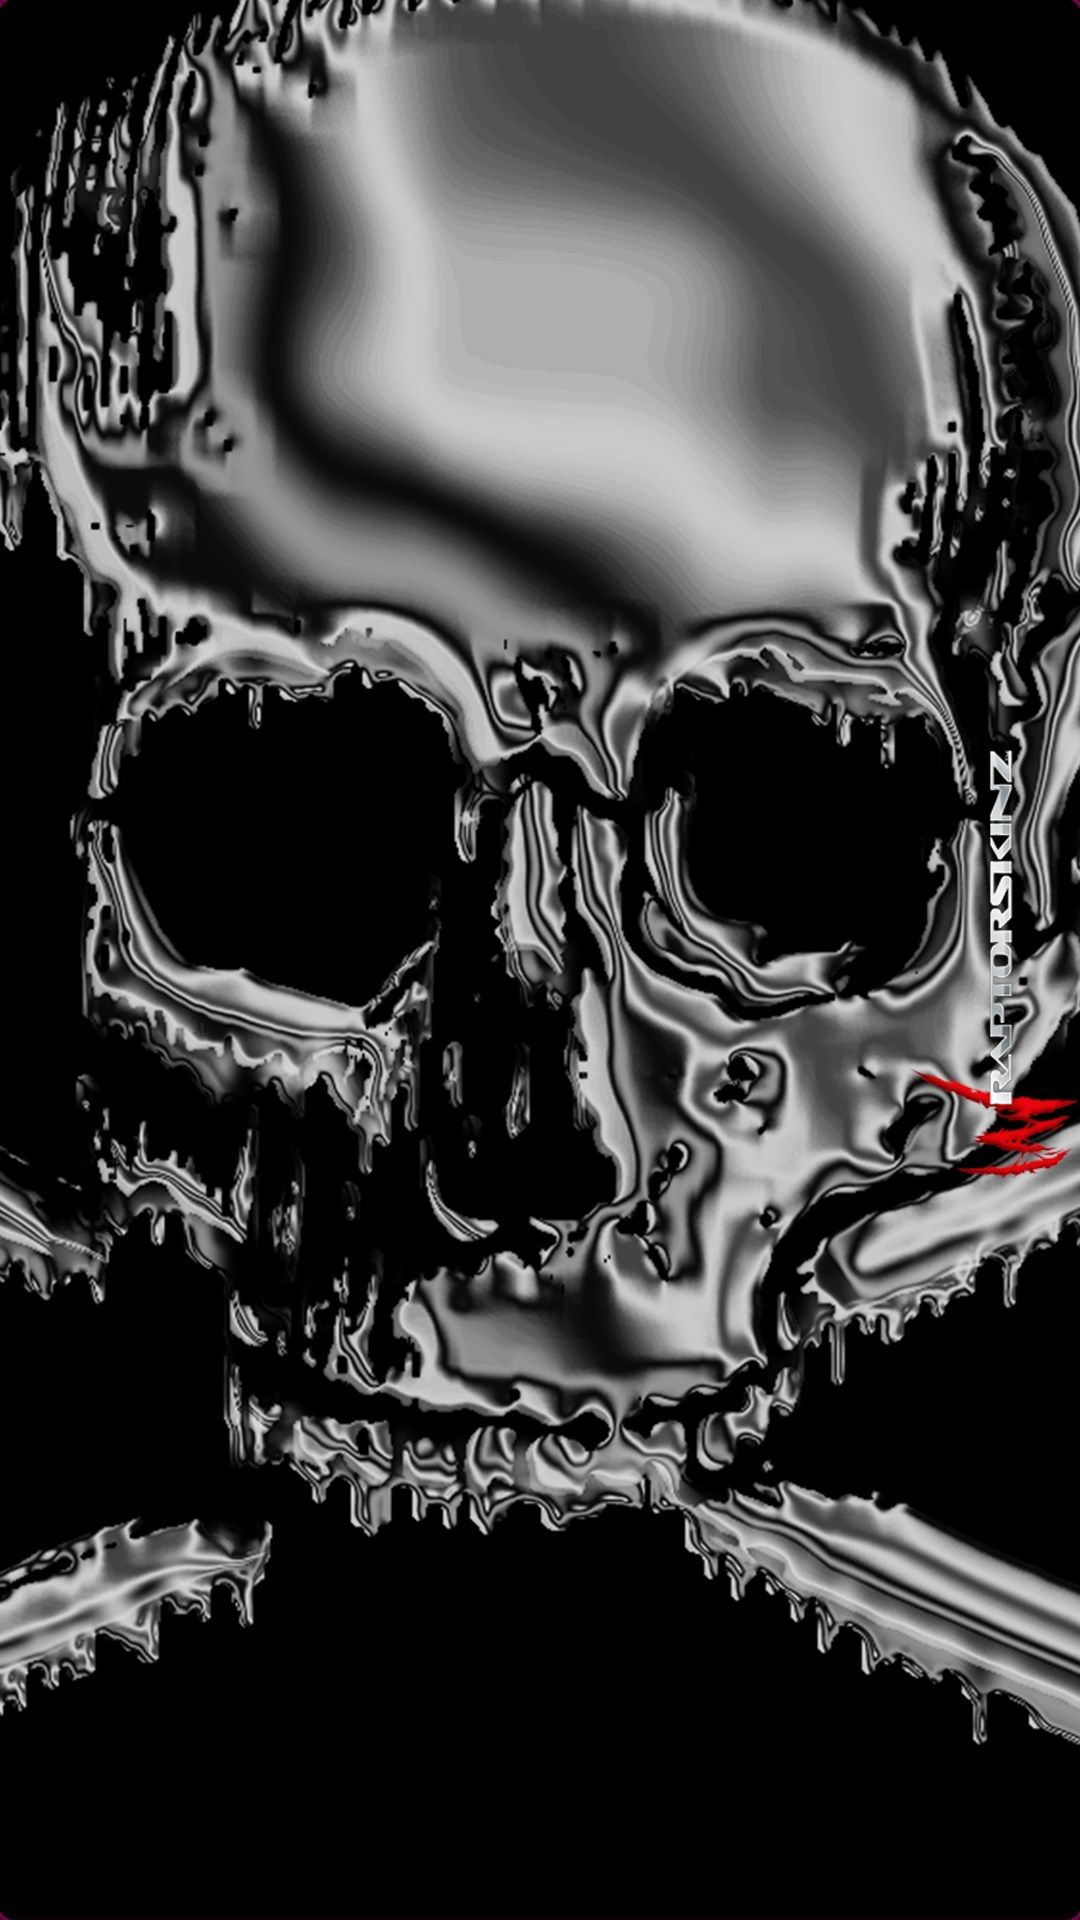  76 Free Skull  Wallpapers  For Android  on WallpaperSafari